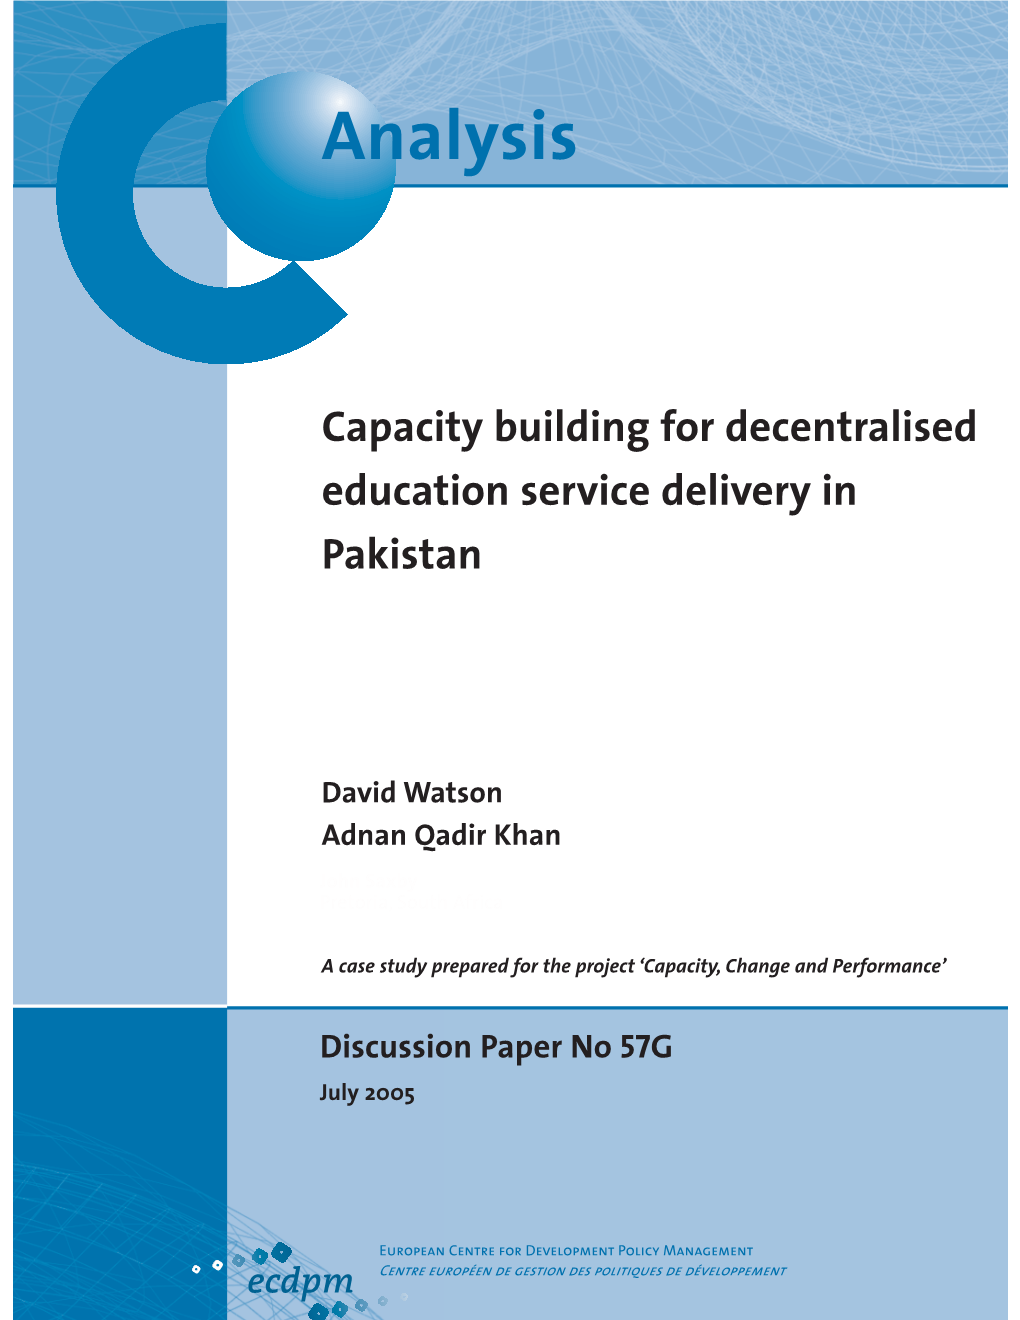 Capacity Building for Decentralised Education Service Delivery in Pakistan